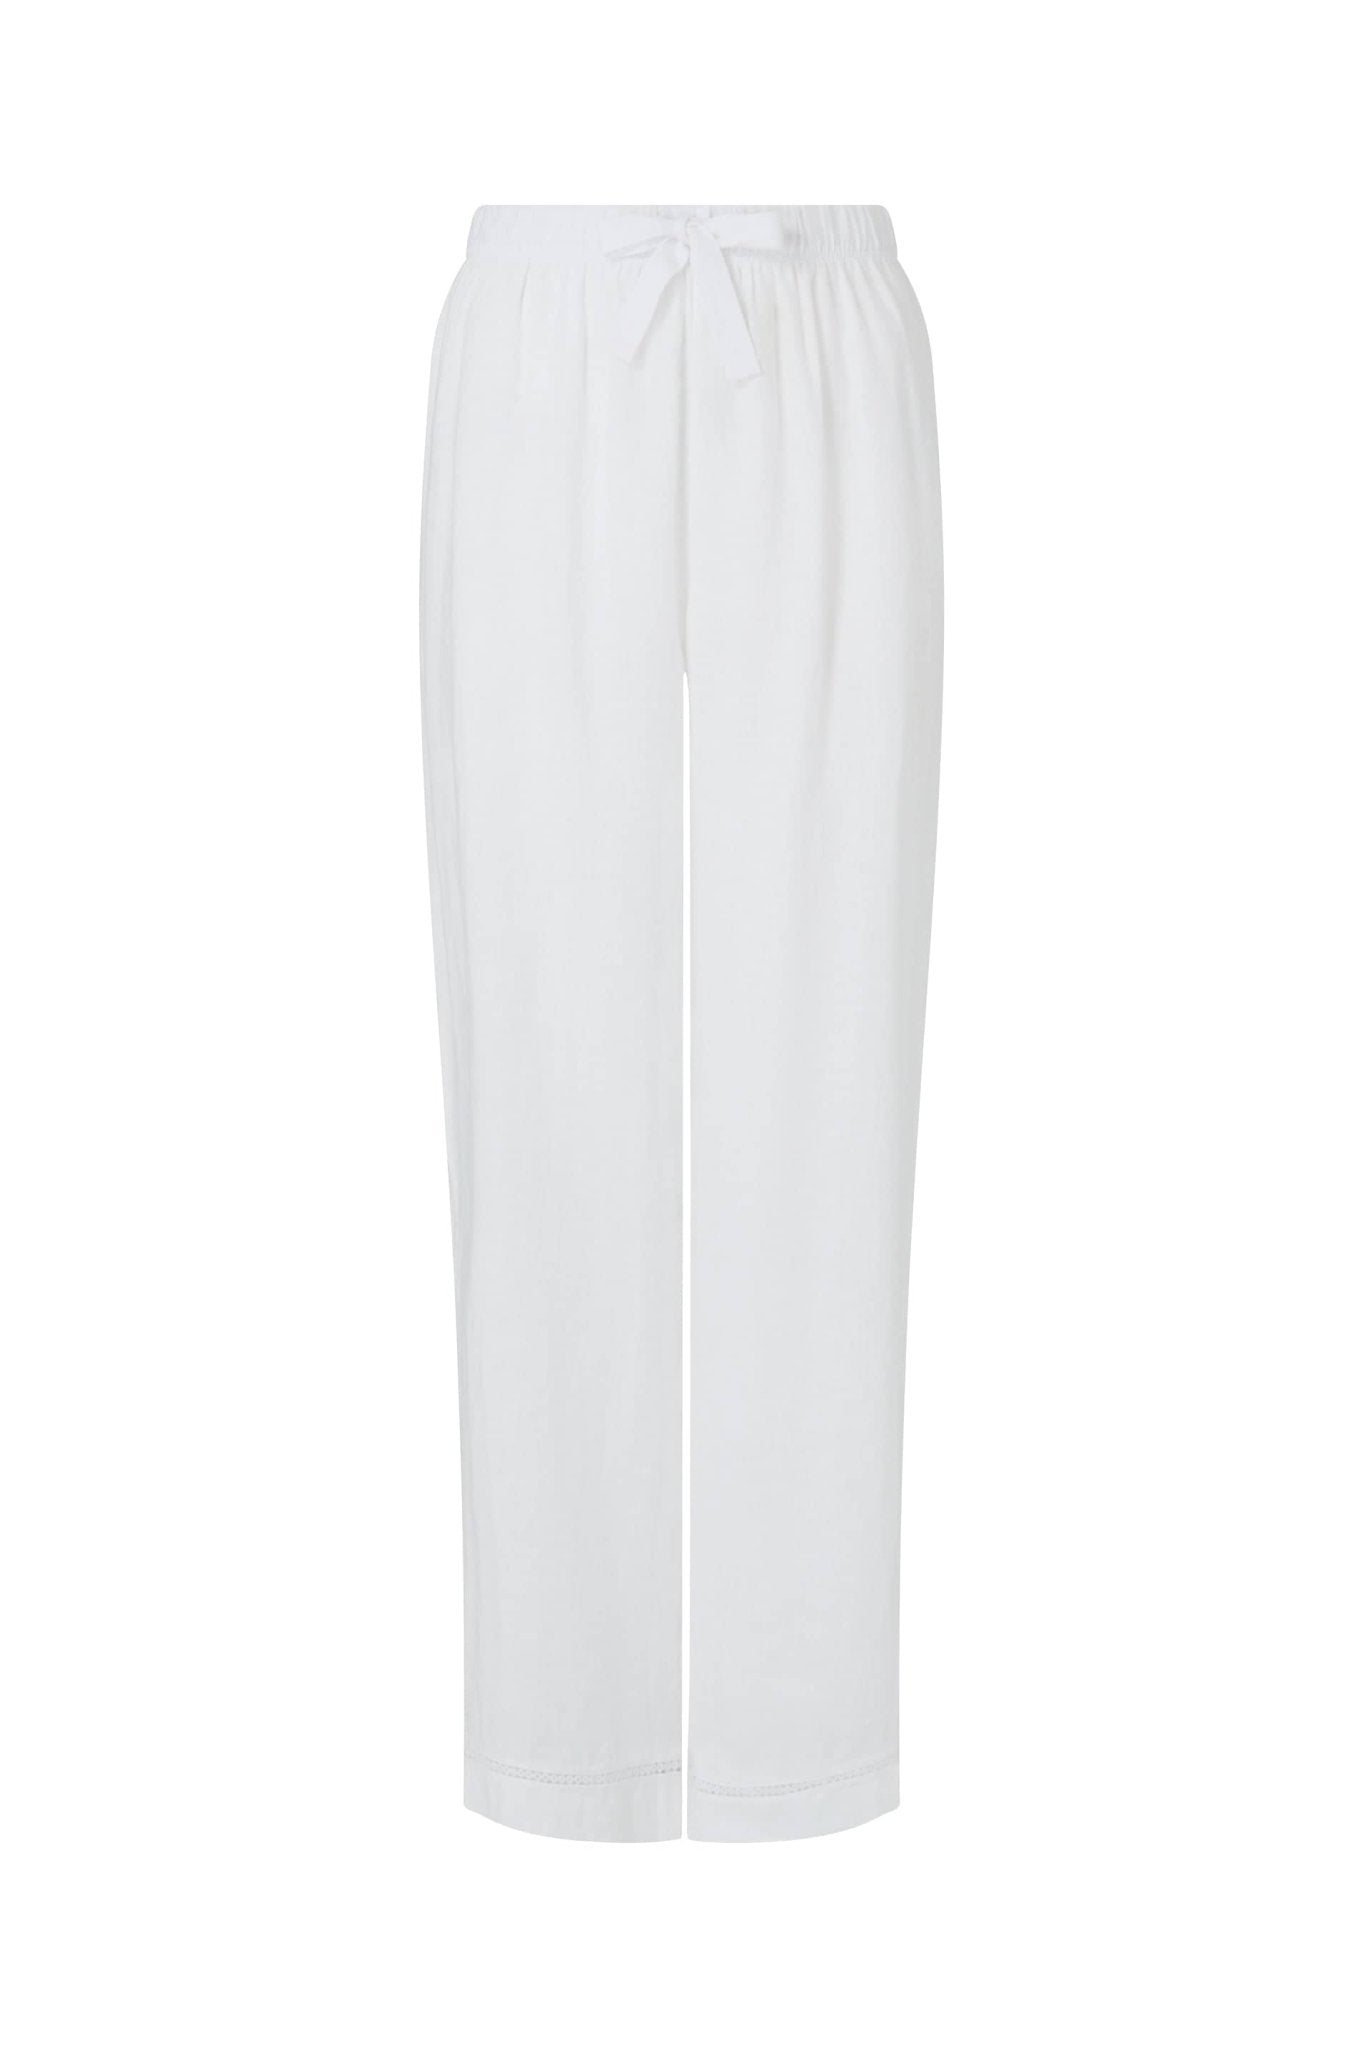 South Sands Long Sleeve Top and Trousers Set in White - Heidi Klein - UK Store